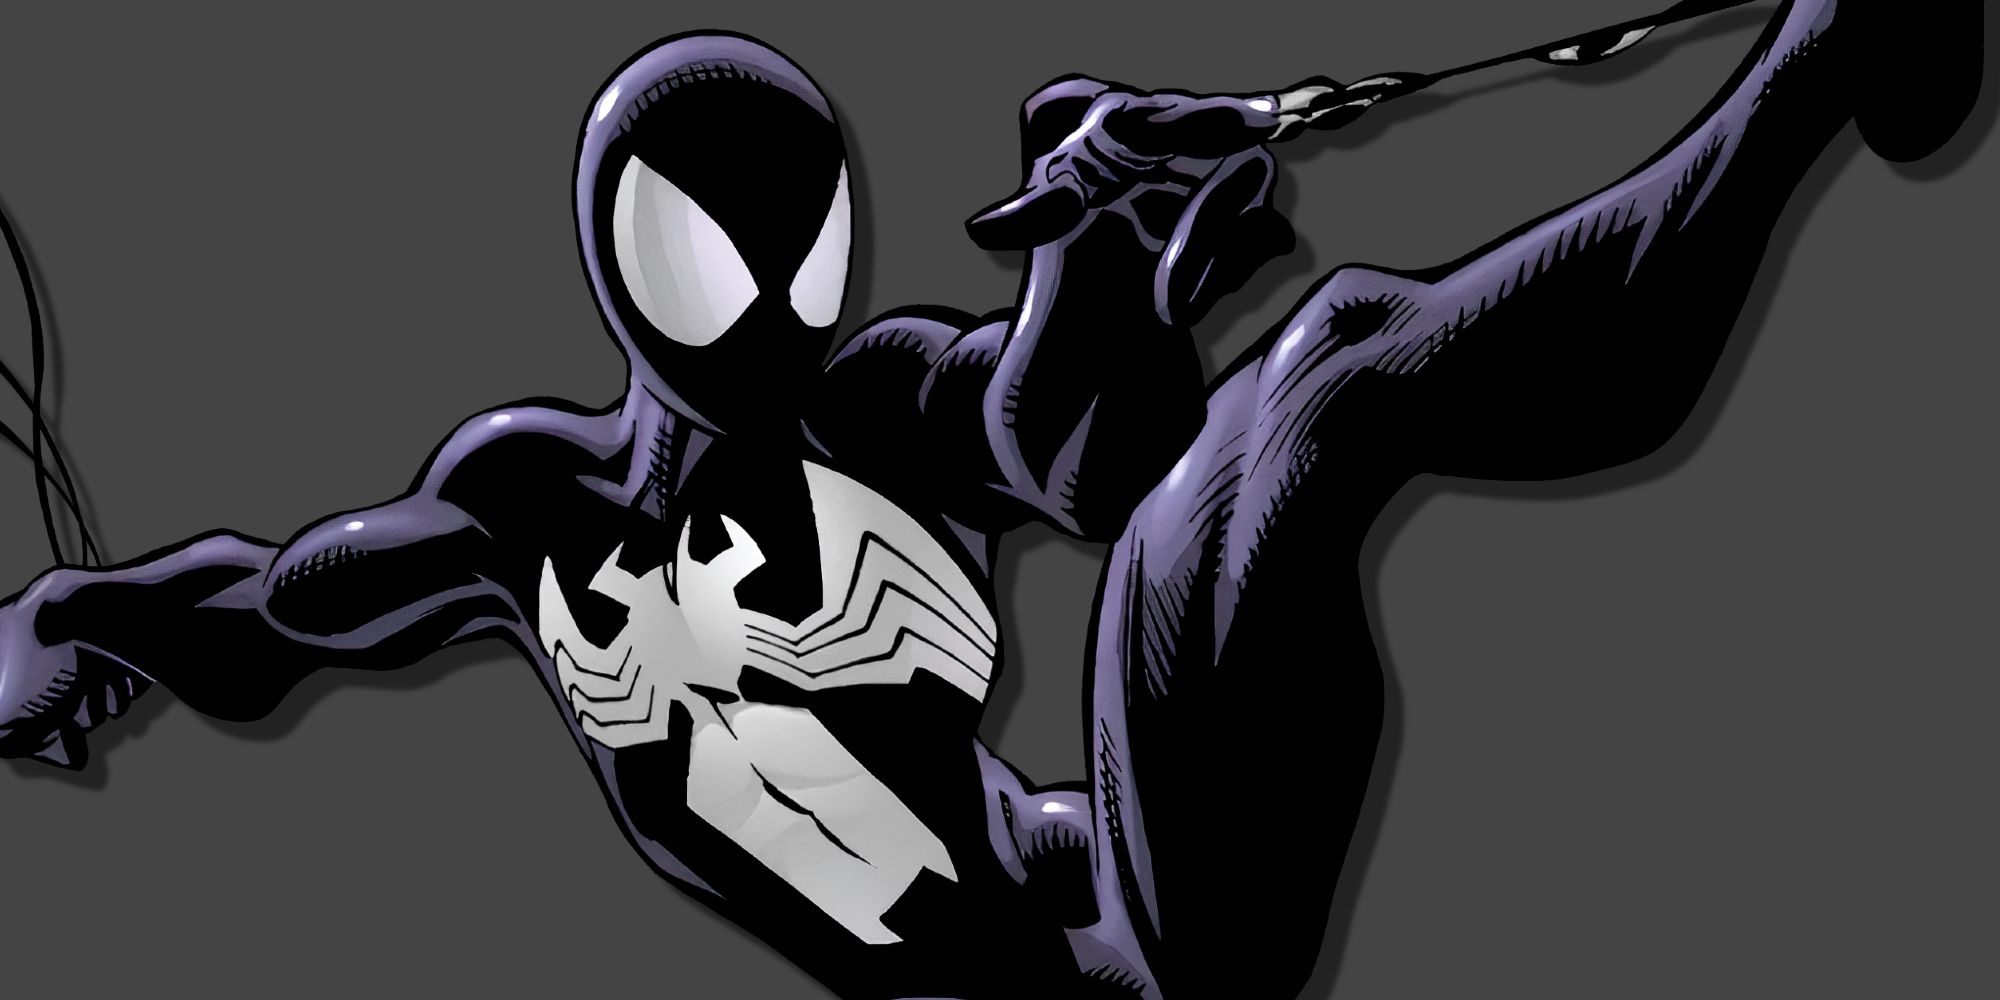 Peter Parker swinging in the Ultimate Symbiote Suit in Ultimate Spider-Man